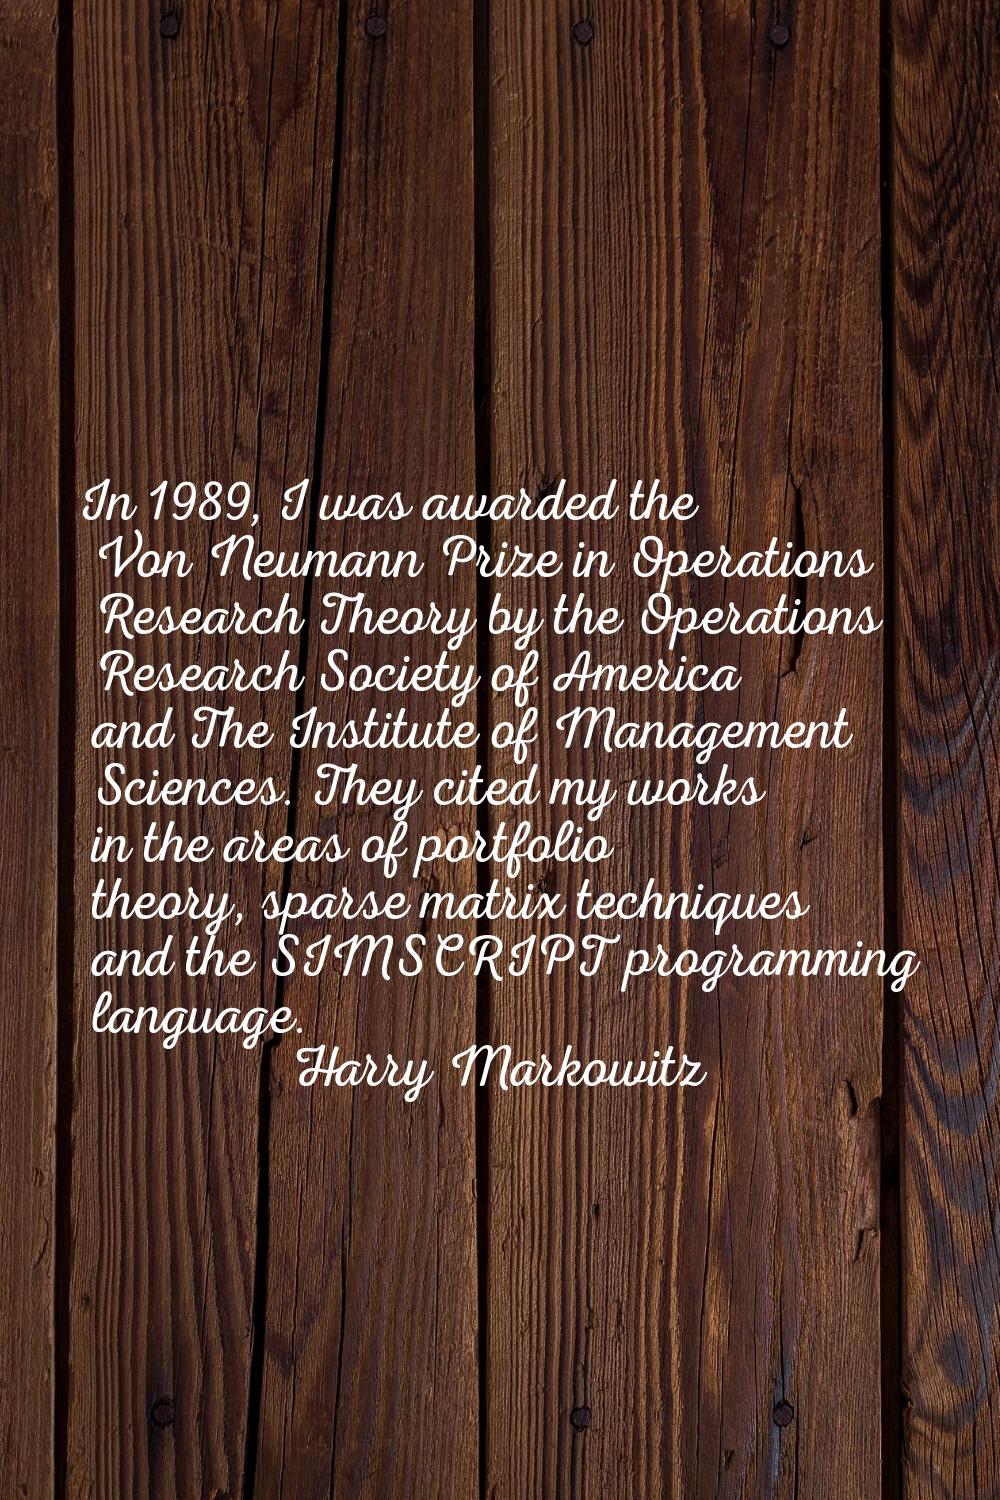 In 1989, I was awarded the Von Neumann Prize in Operations Research Theory by the Operations Resear